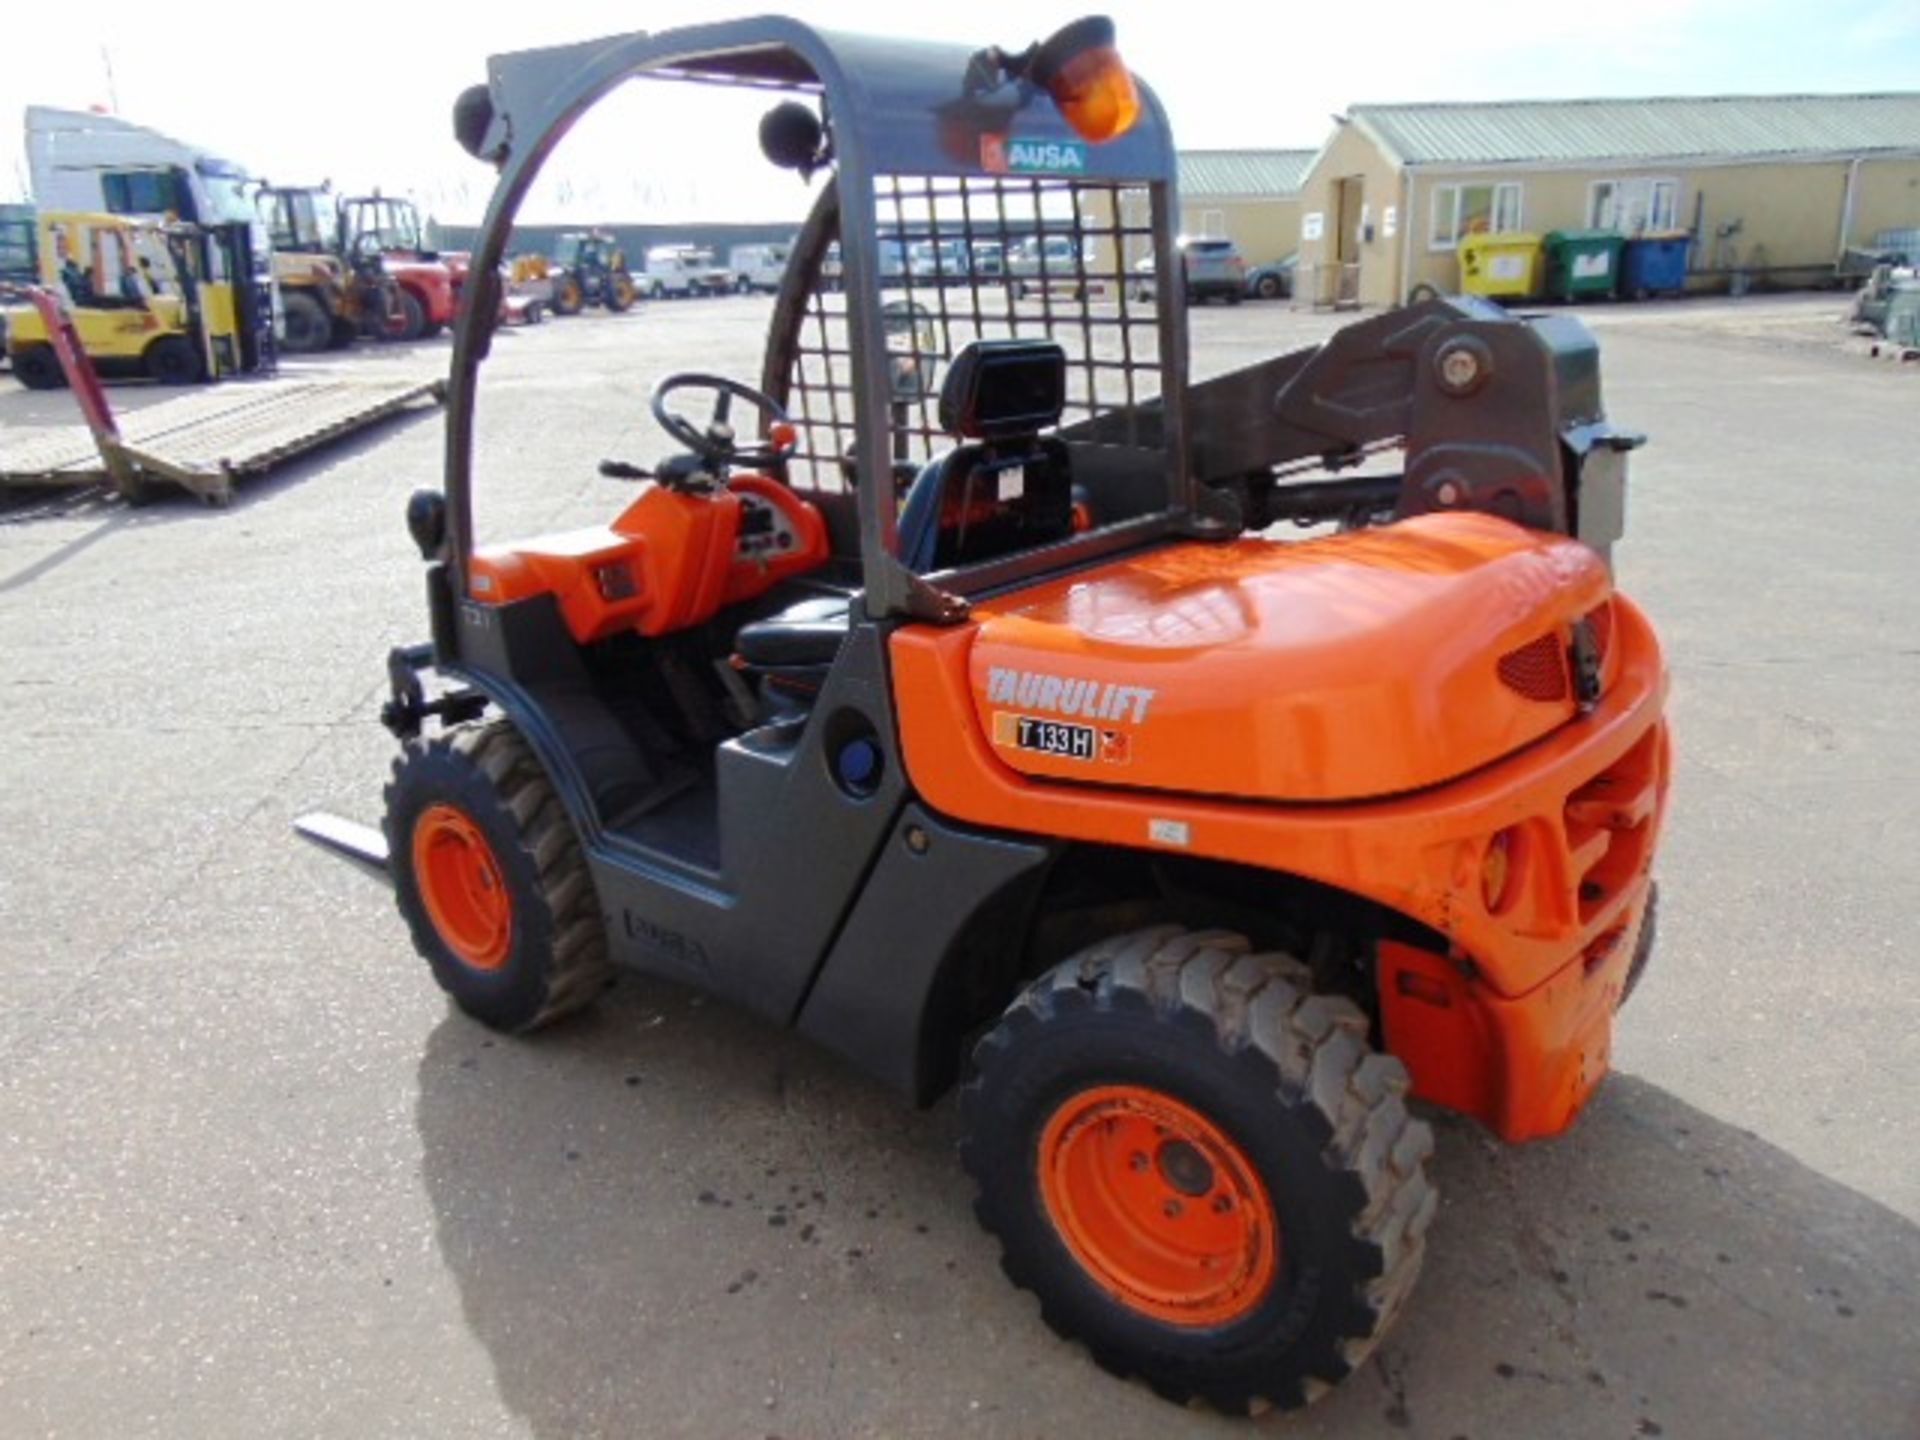 2010 Ausa Taurulift T133H 4WD Compact Forklift with Pallet Tines - Image 8 of 23